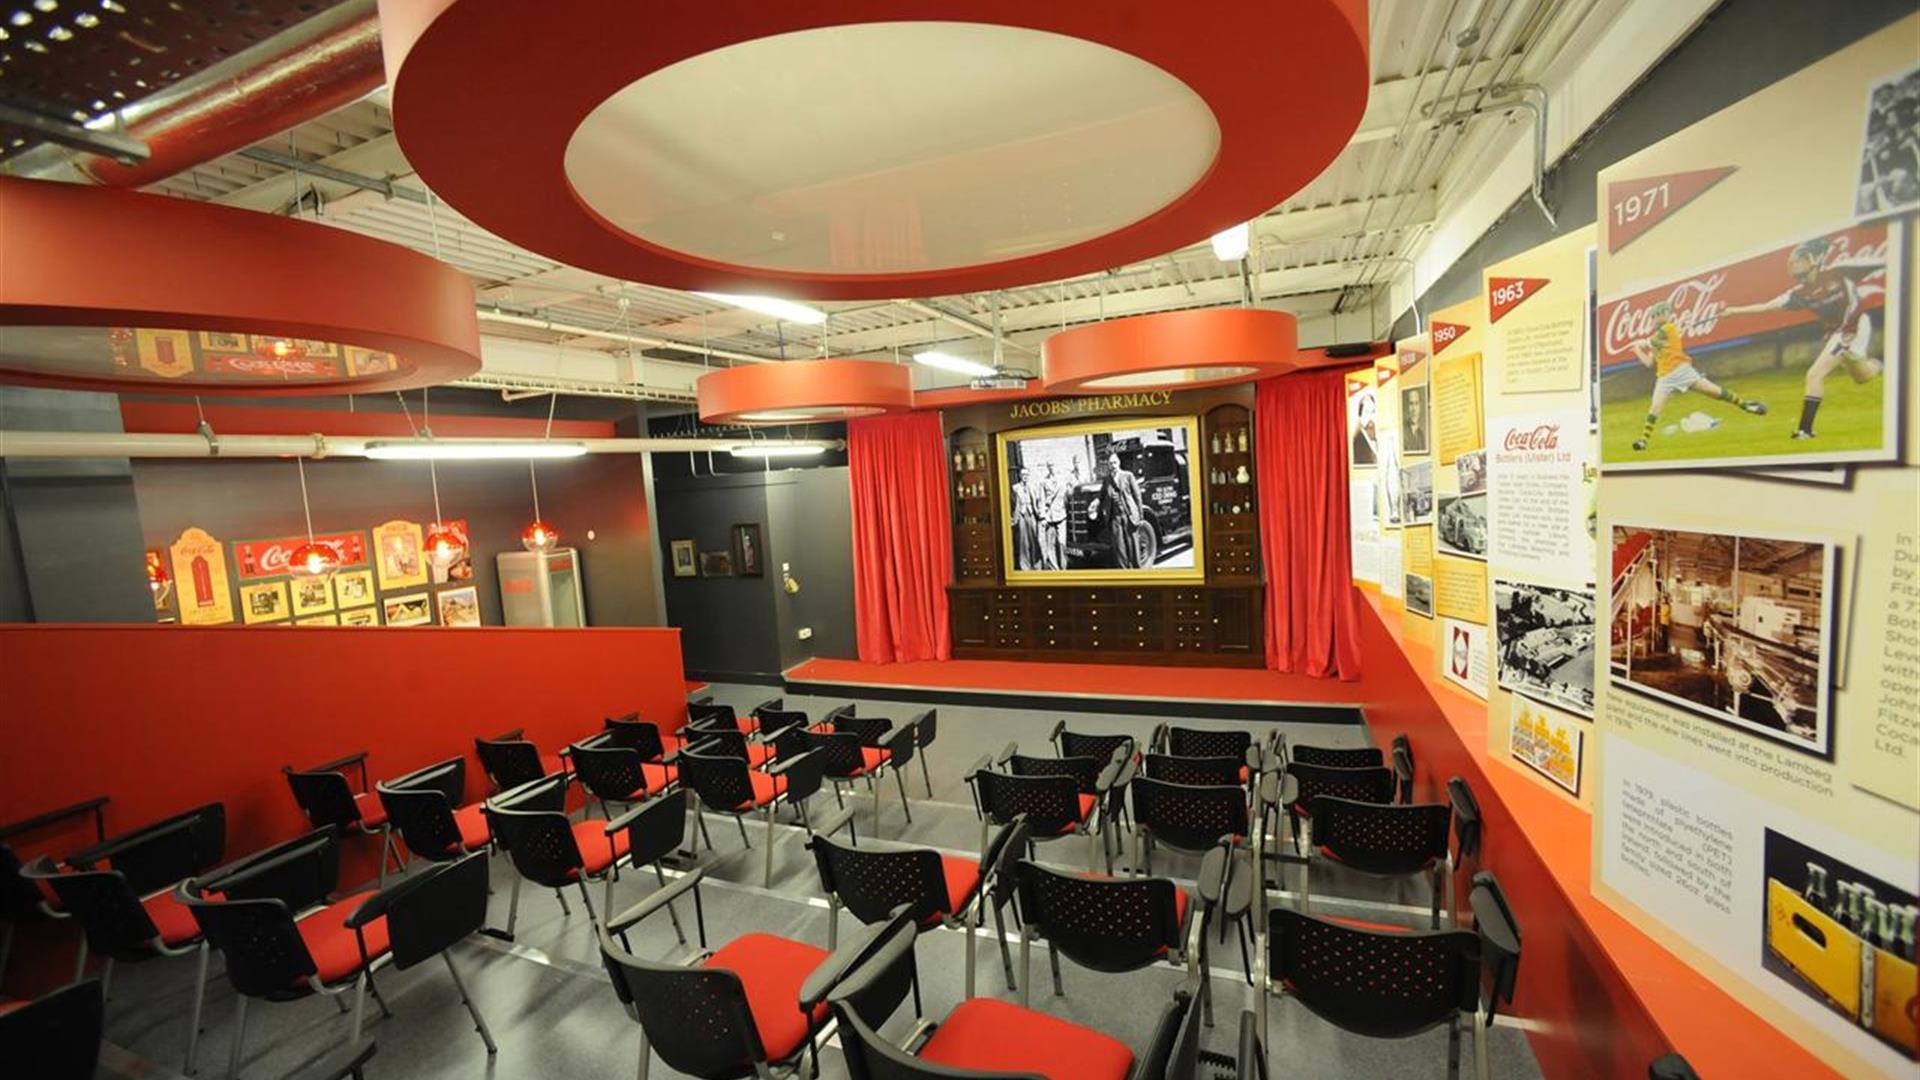 Image is of a meeting room with lots of chairs, images on the walls and large film screen on a stage